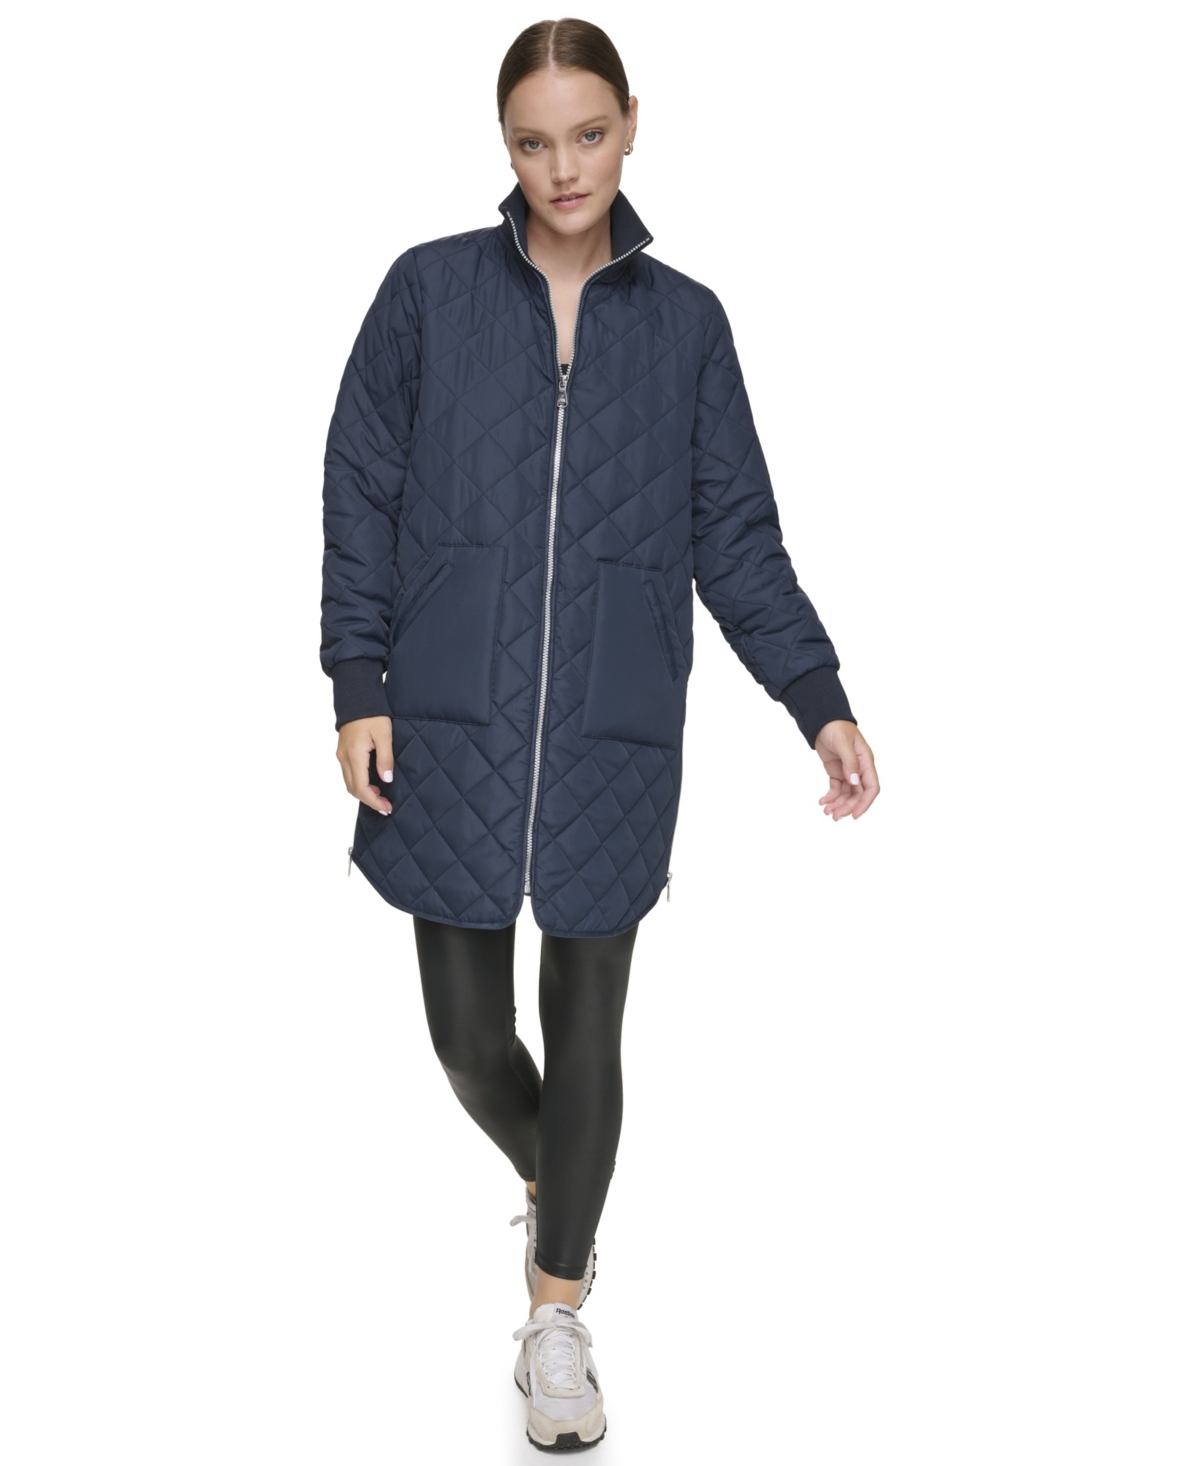 Women's Quilted Longline Jacket With Side Zipper Vents - Twine